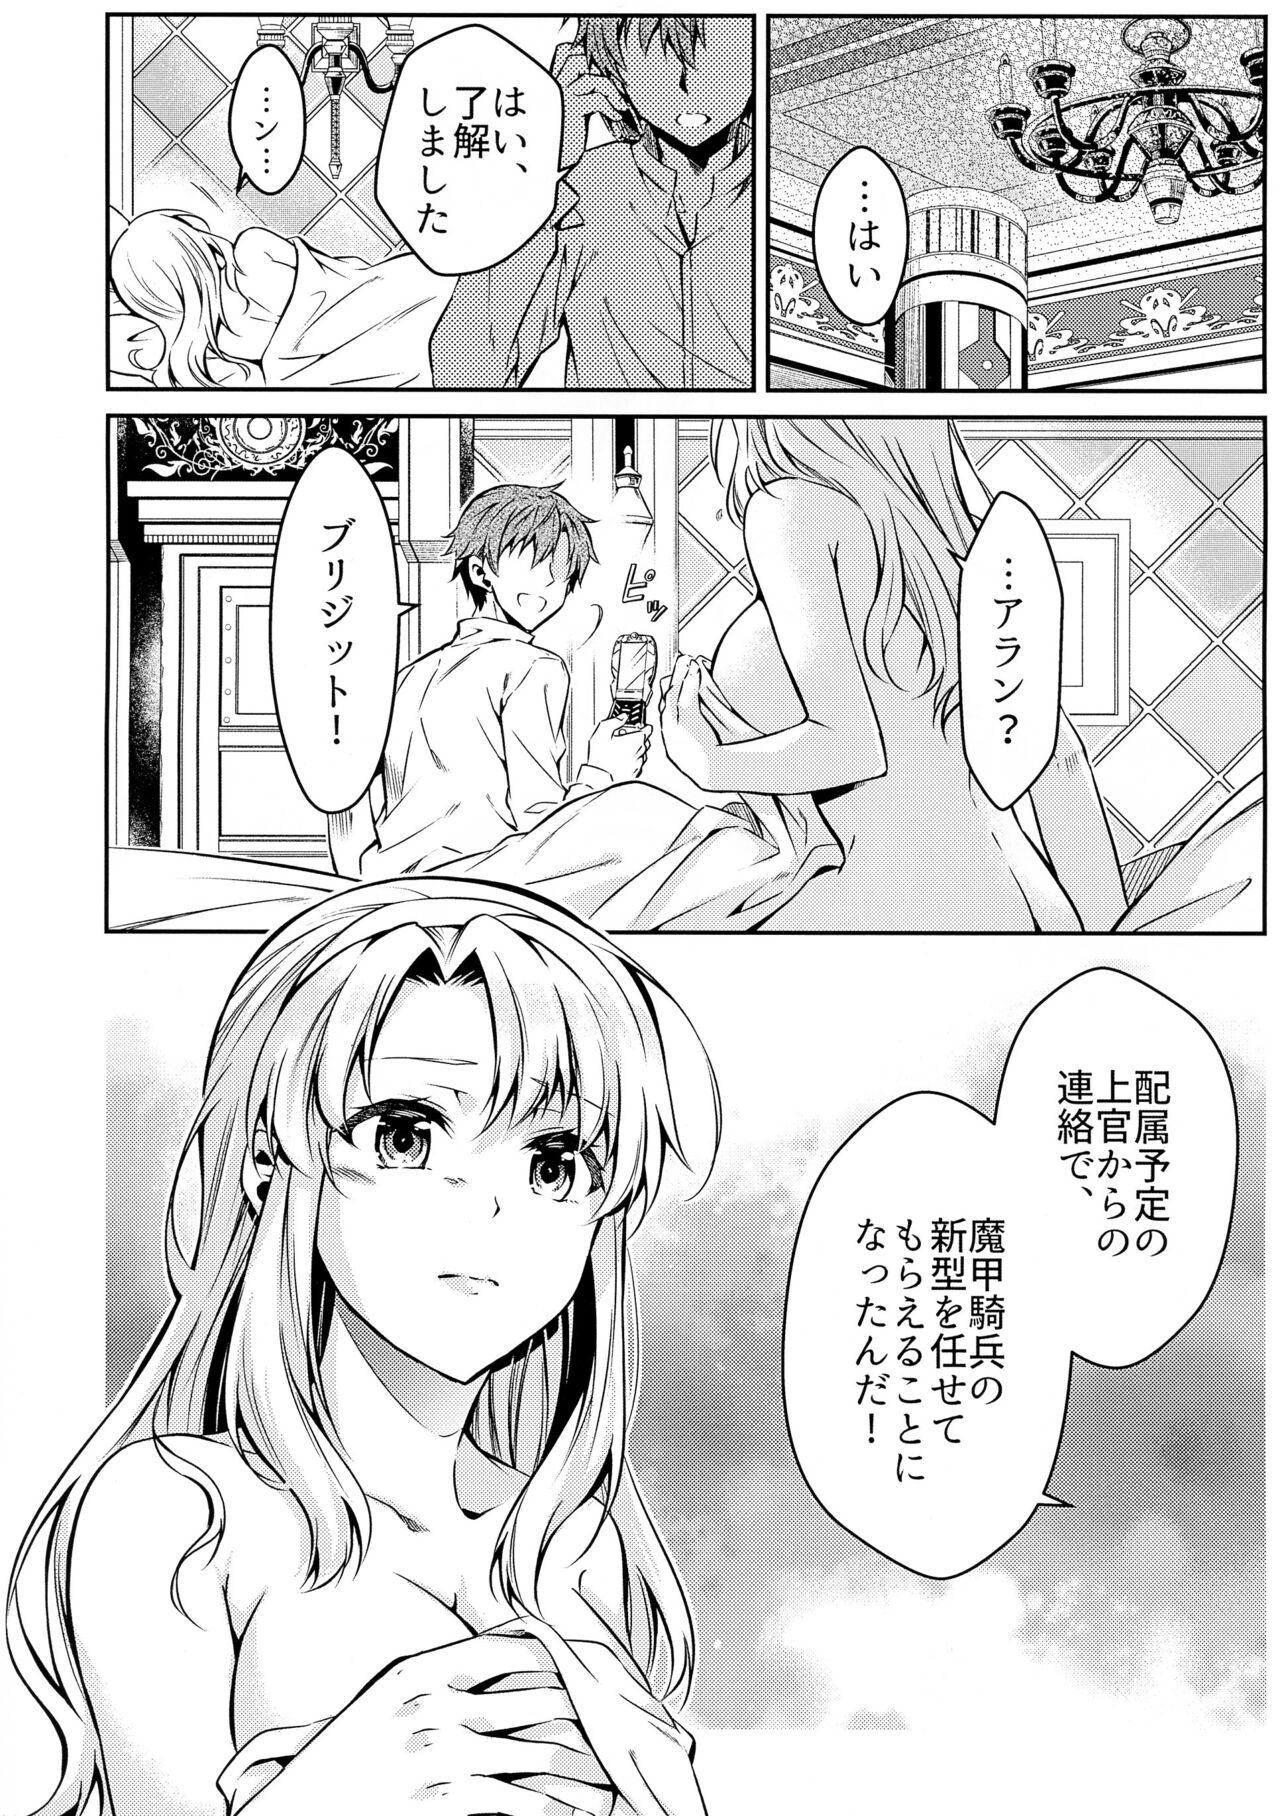 Funny Affection & Blessing - The legend of heroes | eiyuu densetsu Orgasmus - Page 5